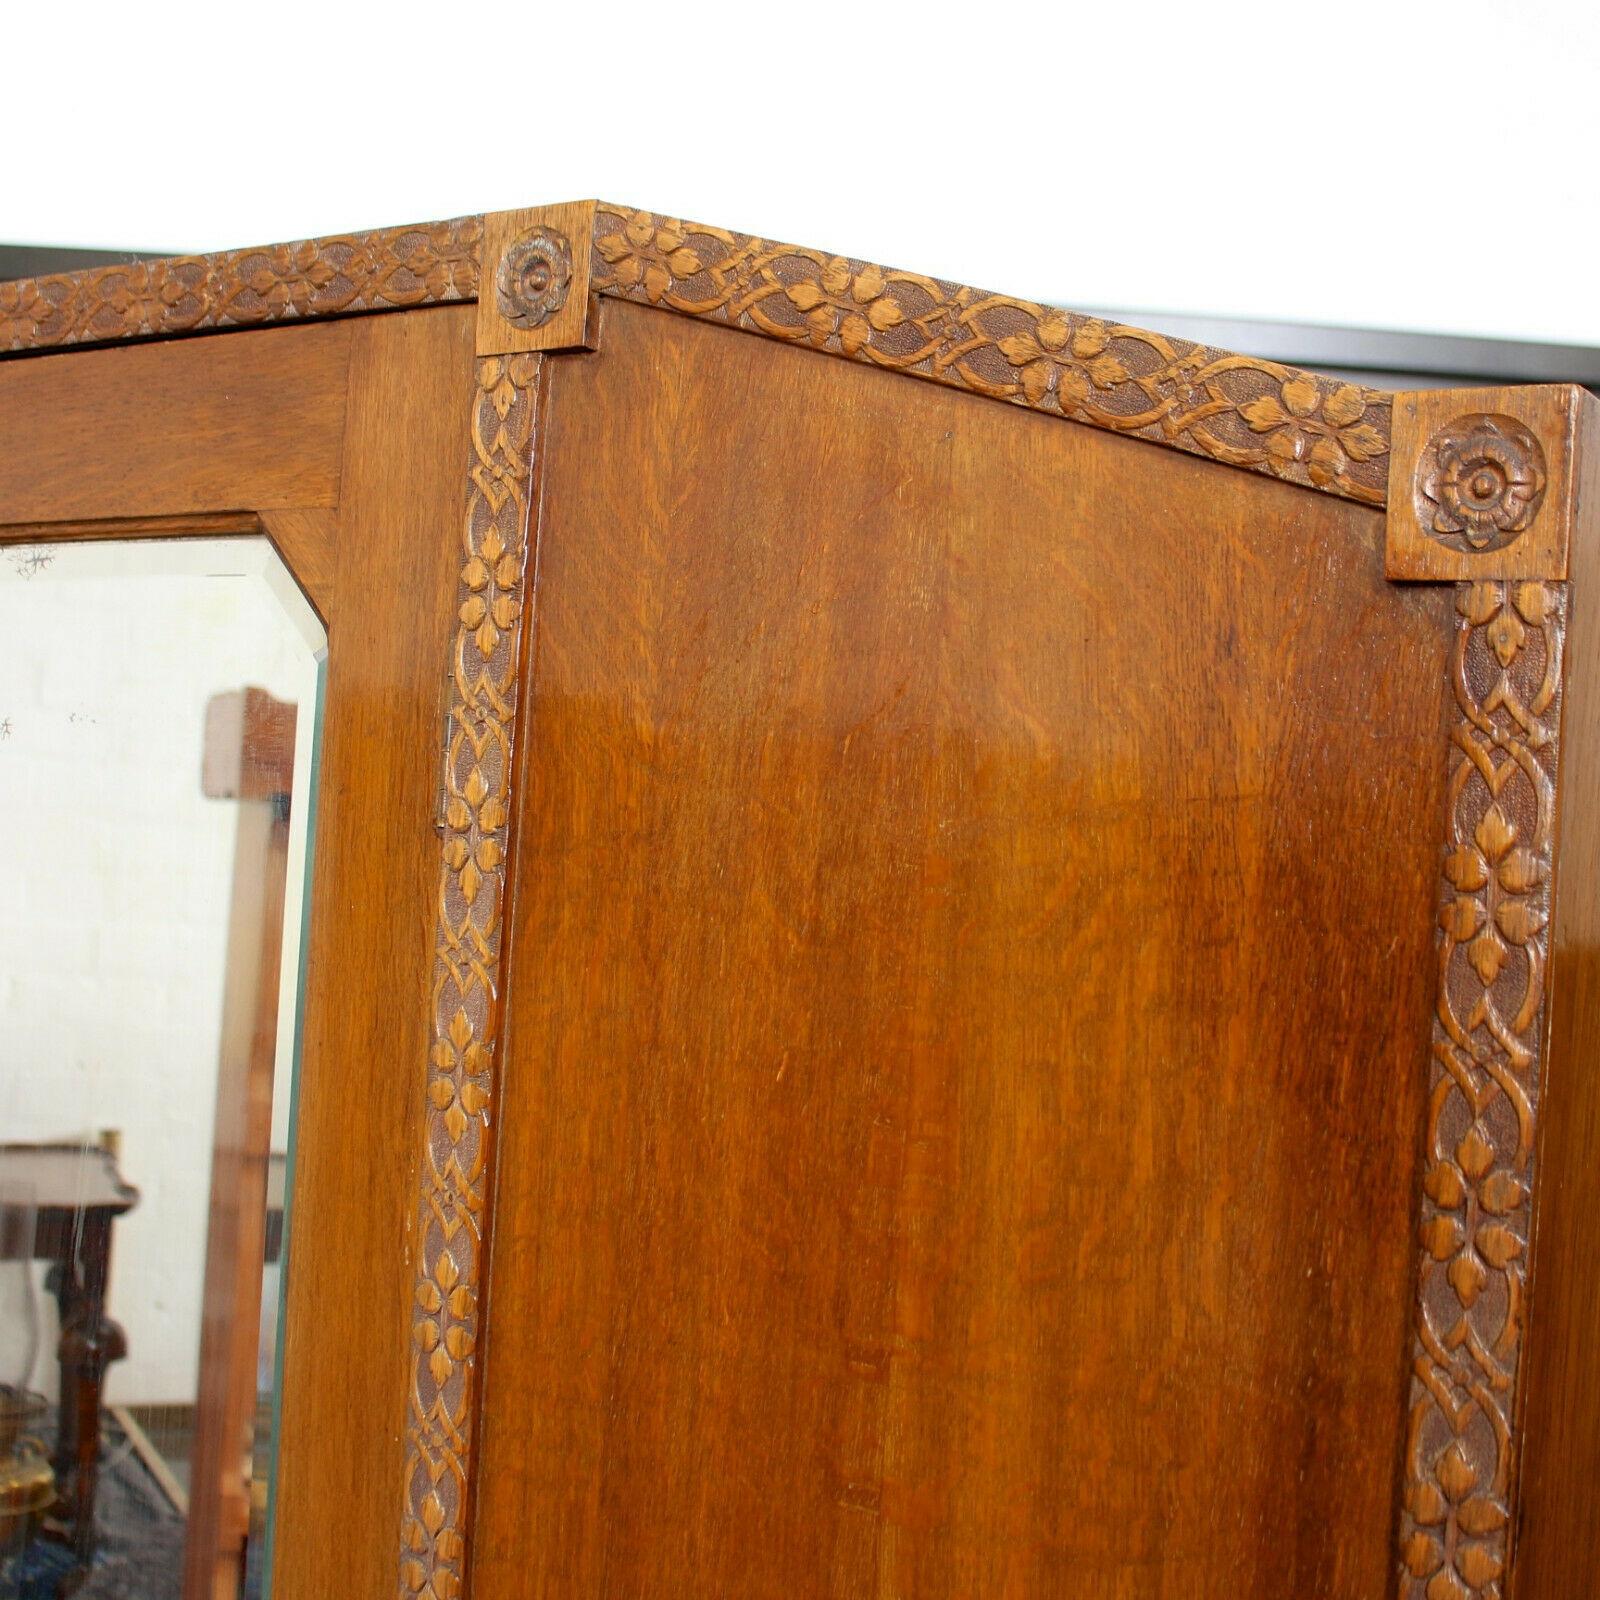 An impressive early 20th century oak wardrobe.

The arched main body fitted a bevelled mirrored door - surrounded by intricately decorated borders - and enclosed two hanging rails and hooks to the interior. Fitted a drawer to the base mounted with